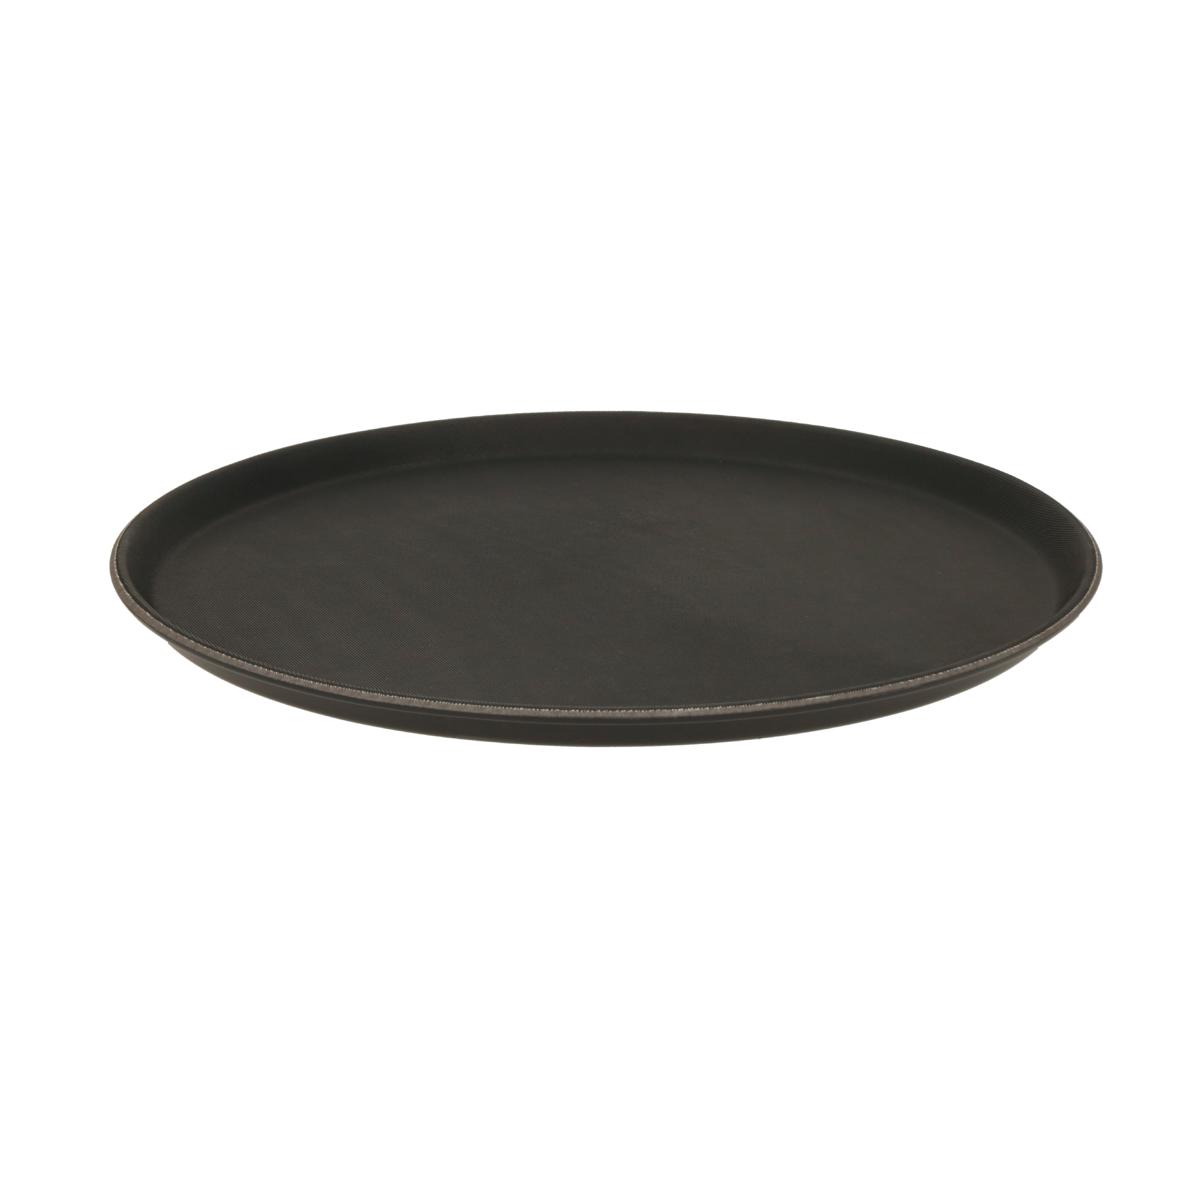 Professional Catering Tray - Wetwang - Huyton